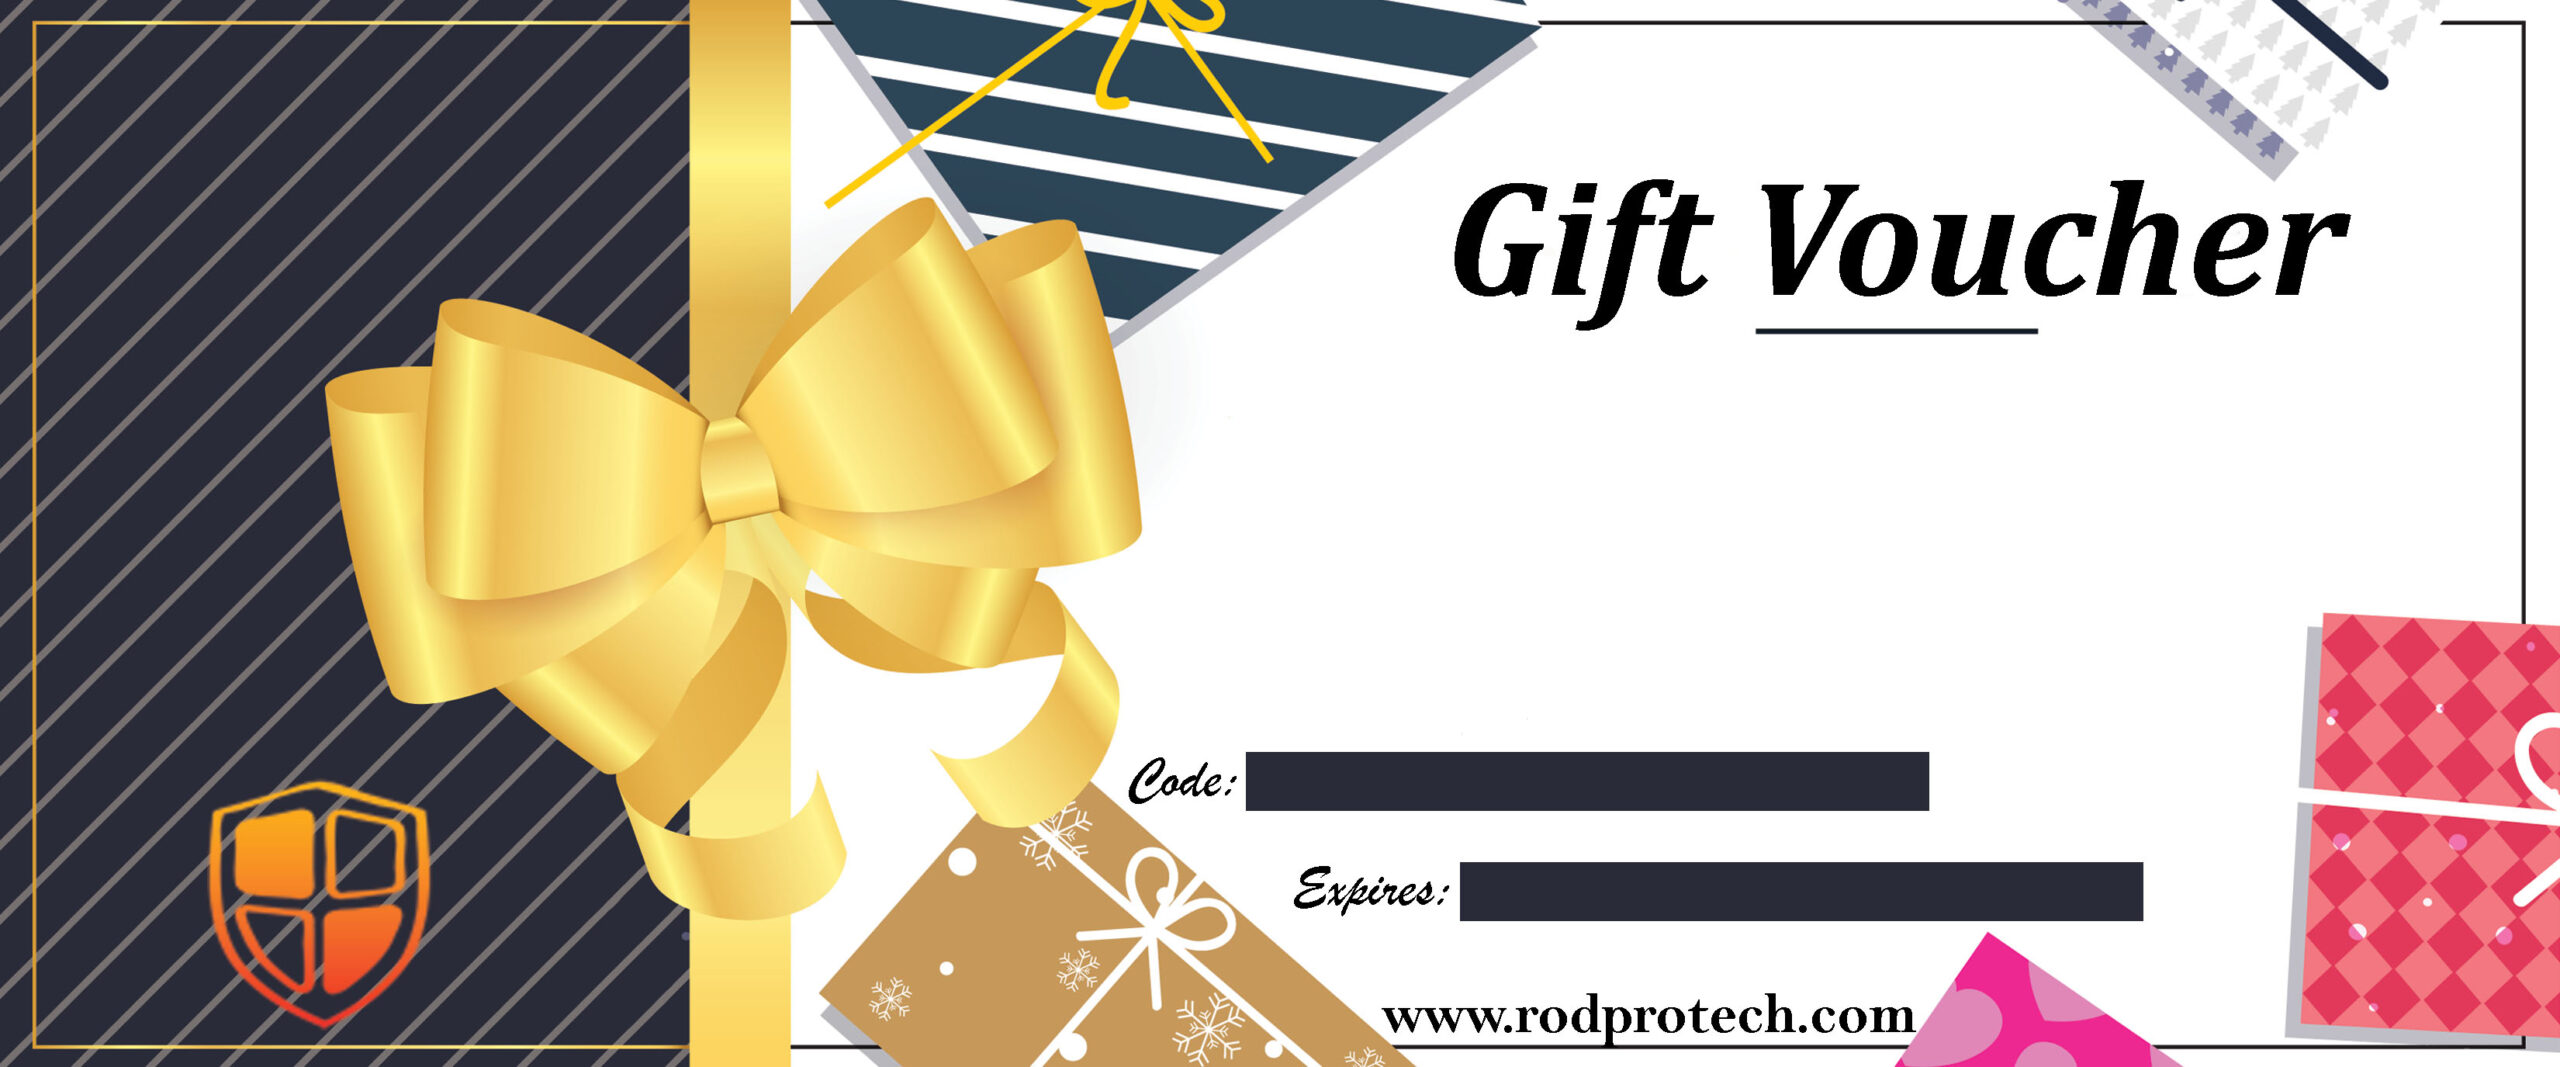 Vouchers Gift Voucher or Gift Card - Shop Only - Fishing from